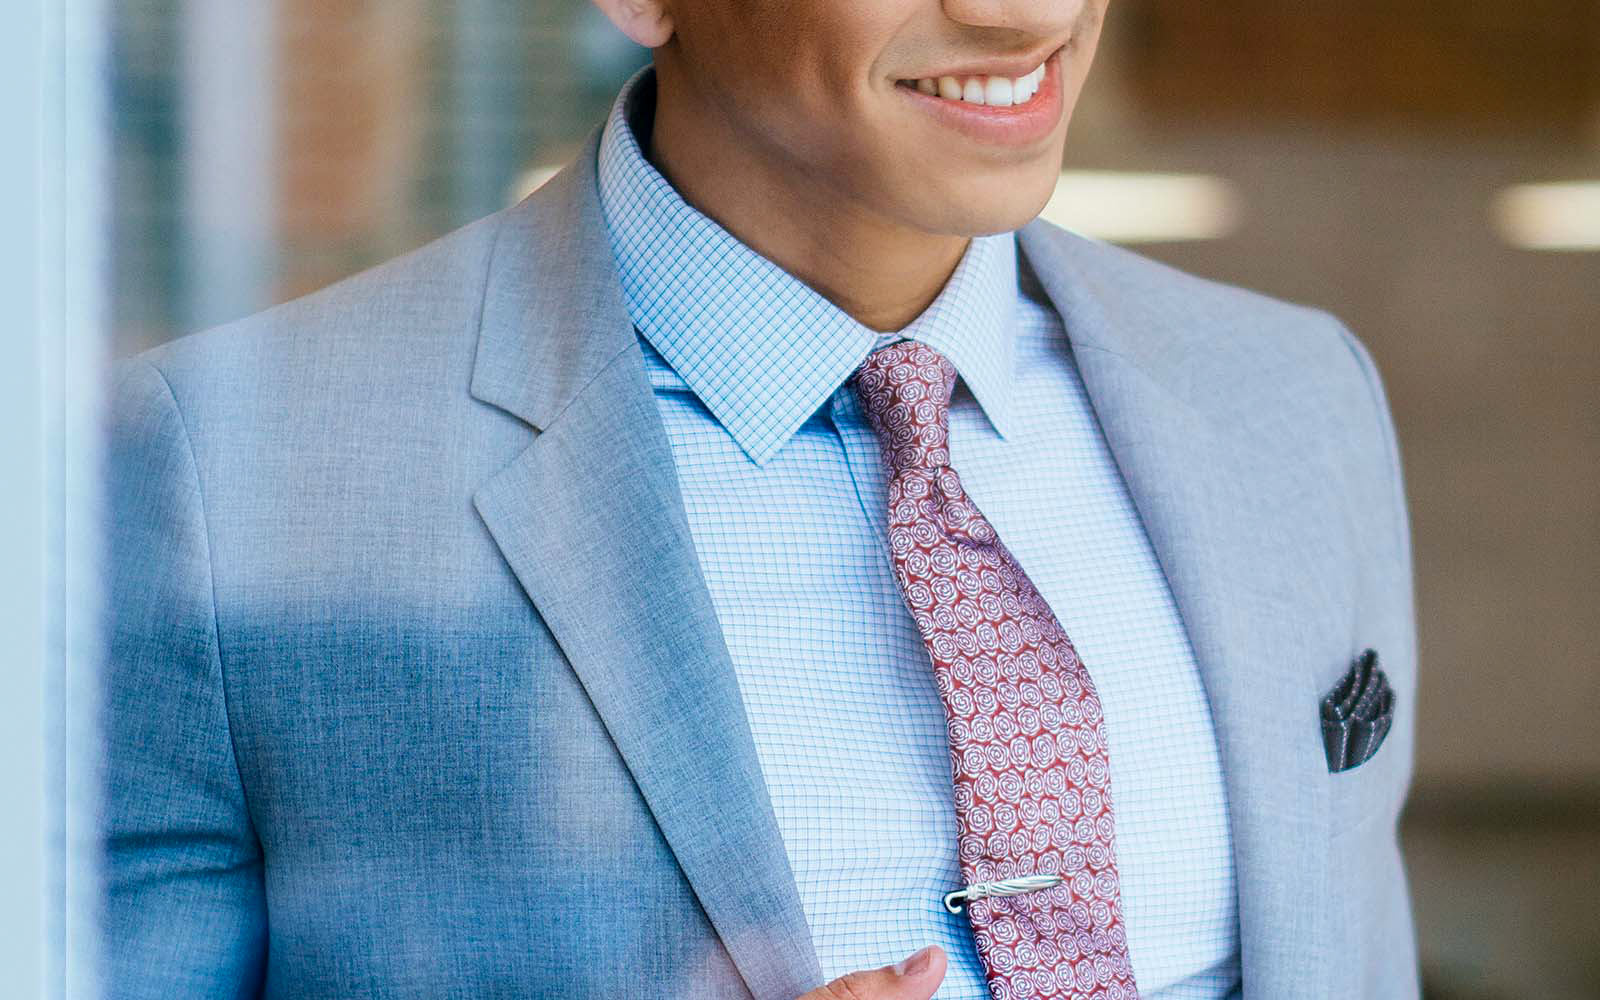 How to Match Shirt and Tie Properly - Suits Expert